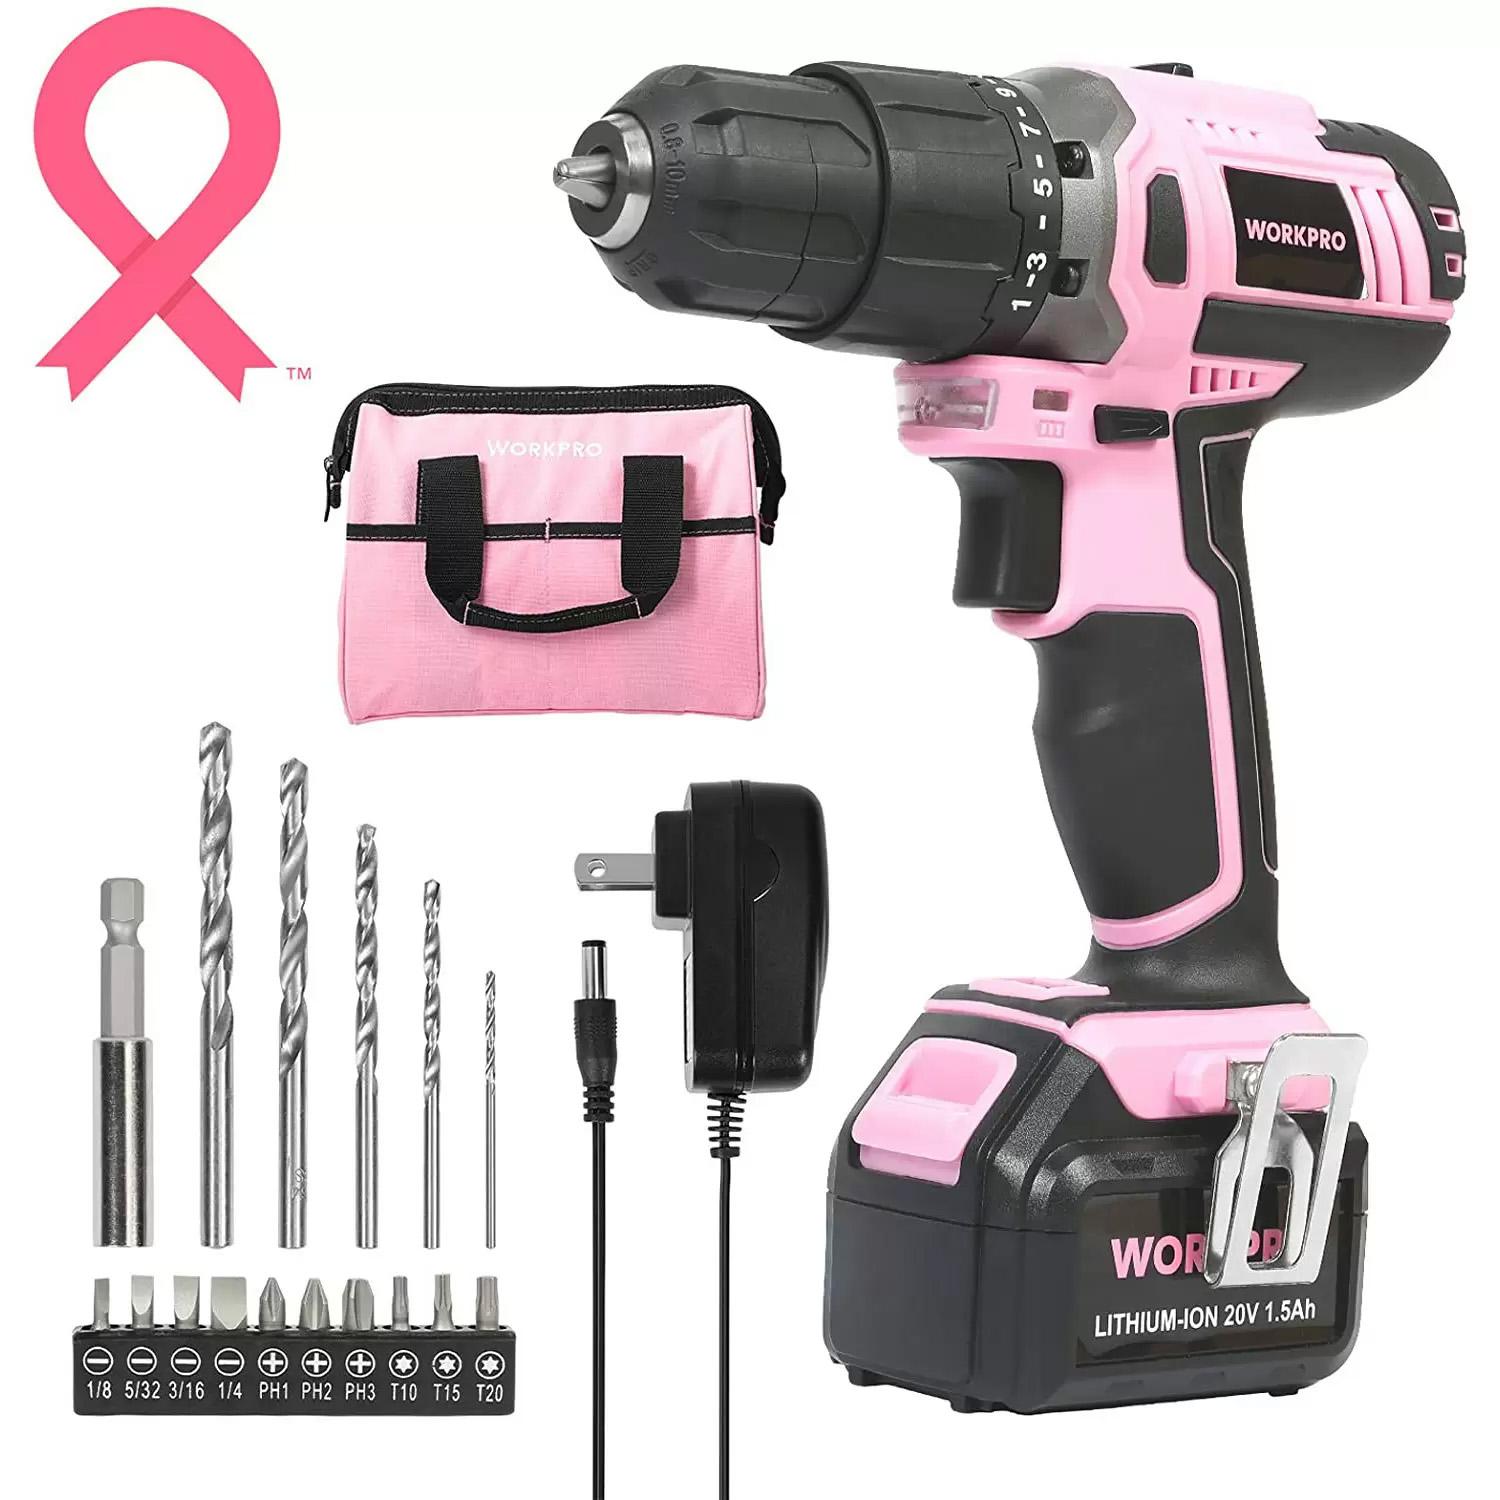 WorkPro Cordless 20V Lithium-ion Drill Driver Set for $39.99 Shipped